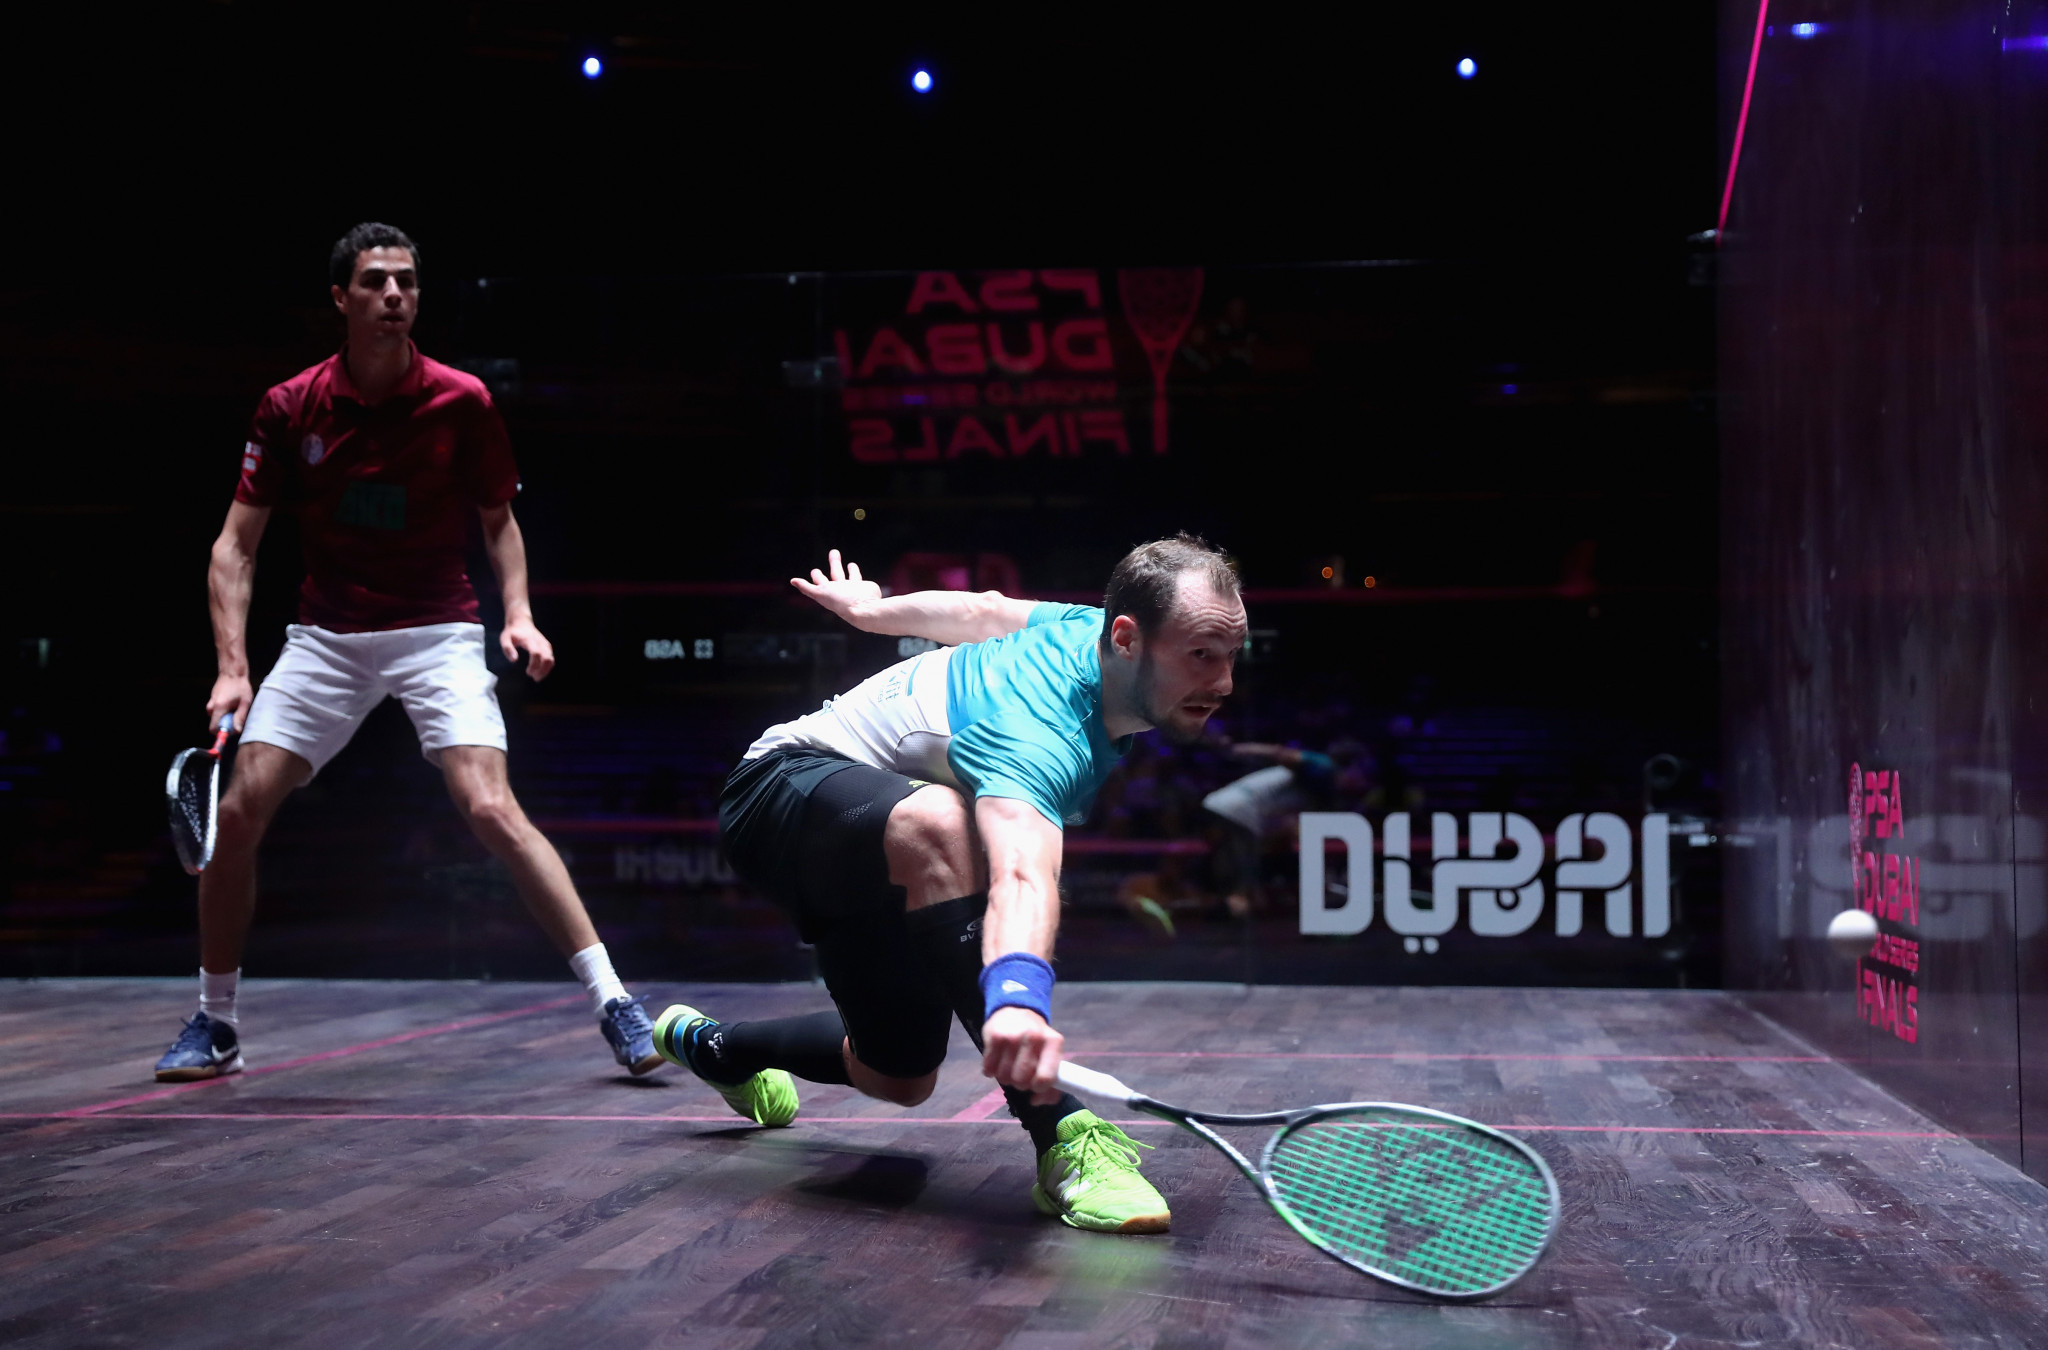 Gaultier to make long-awaited return to PSA World Tour at J.P. Morgan Tournament of Champions